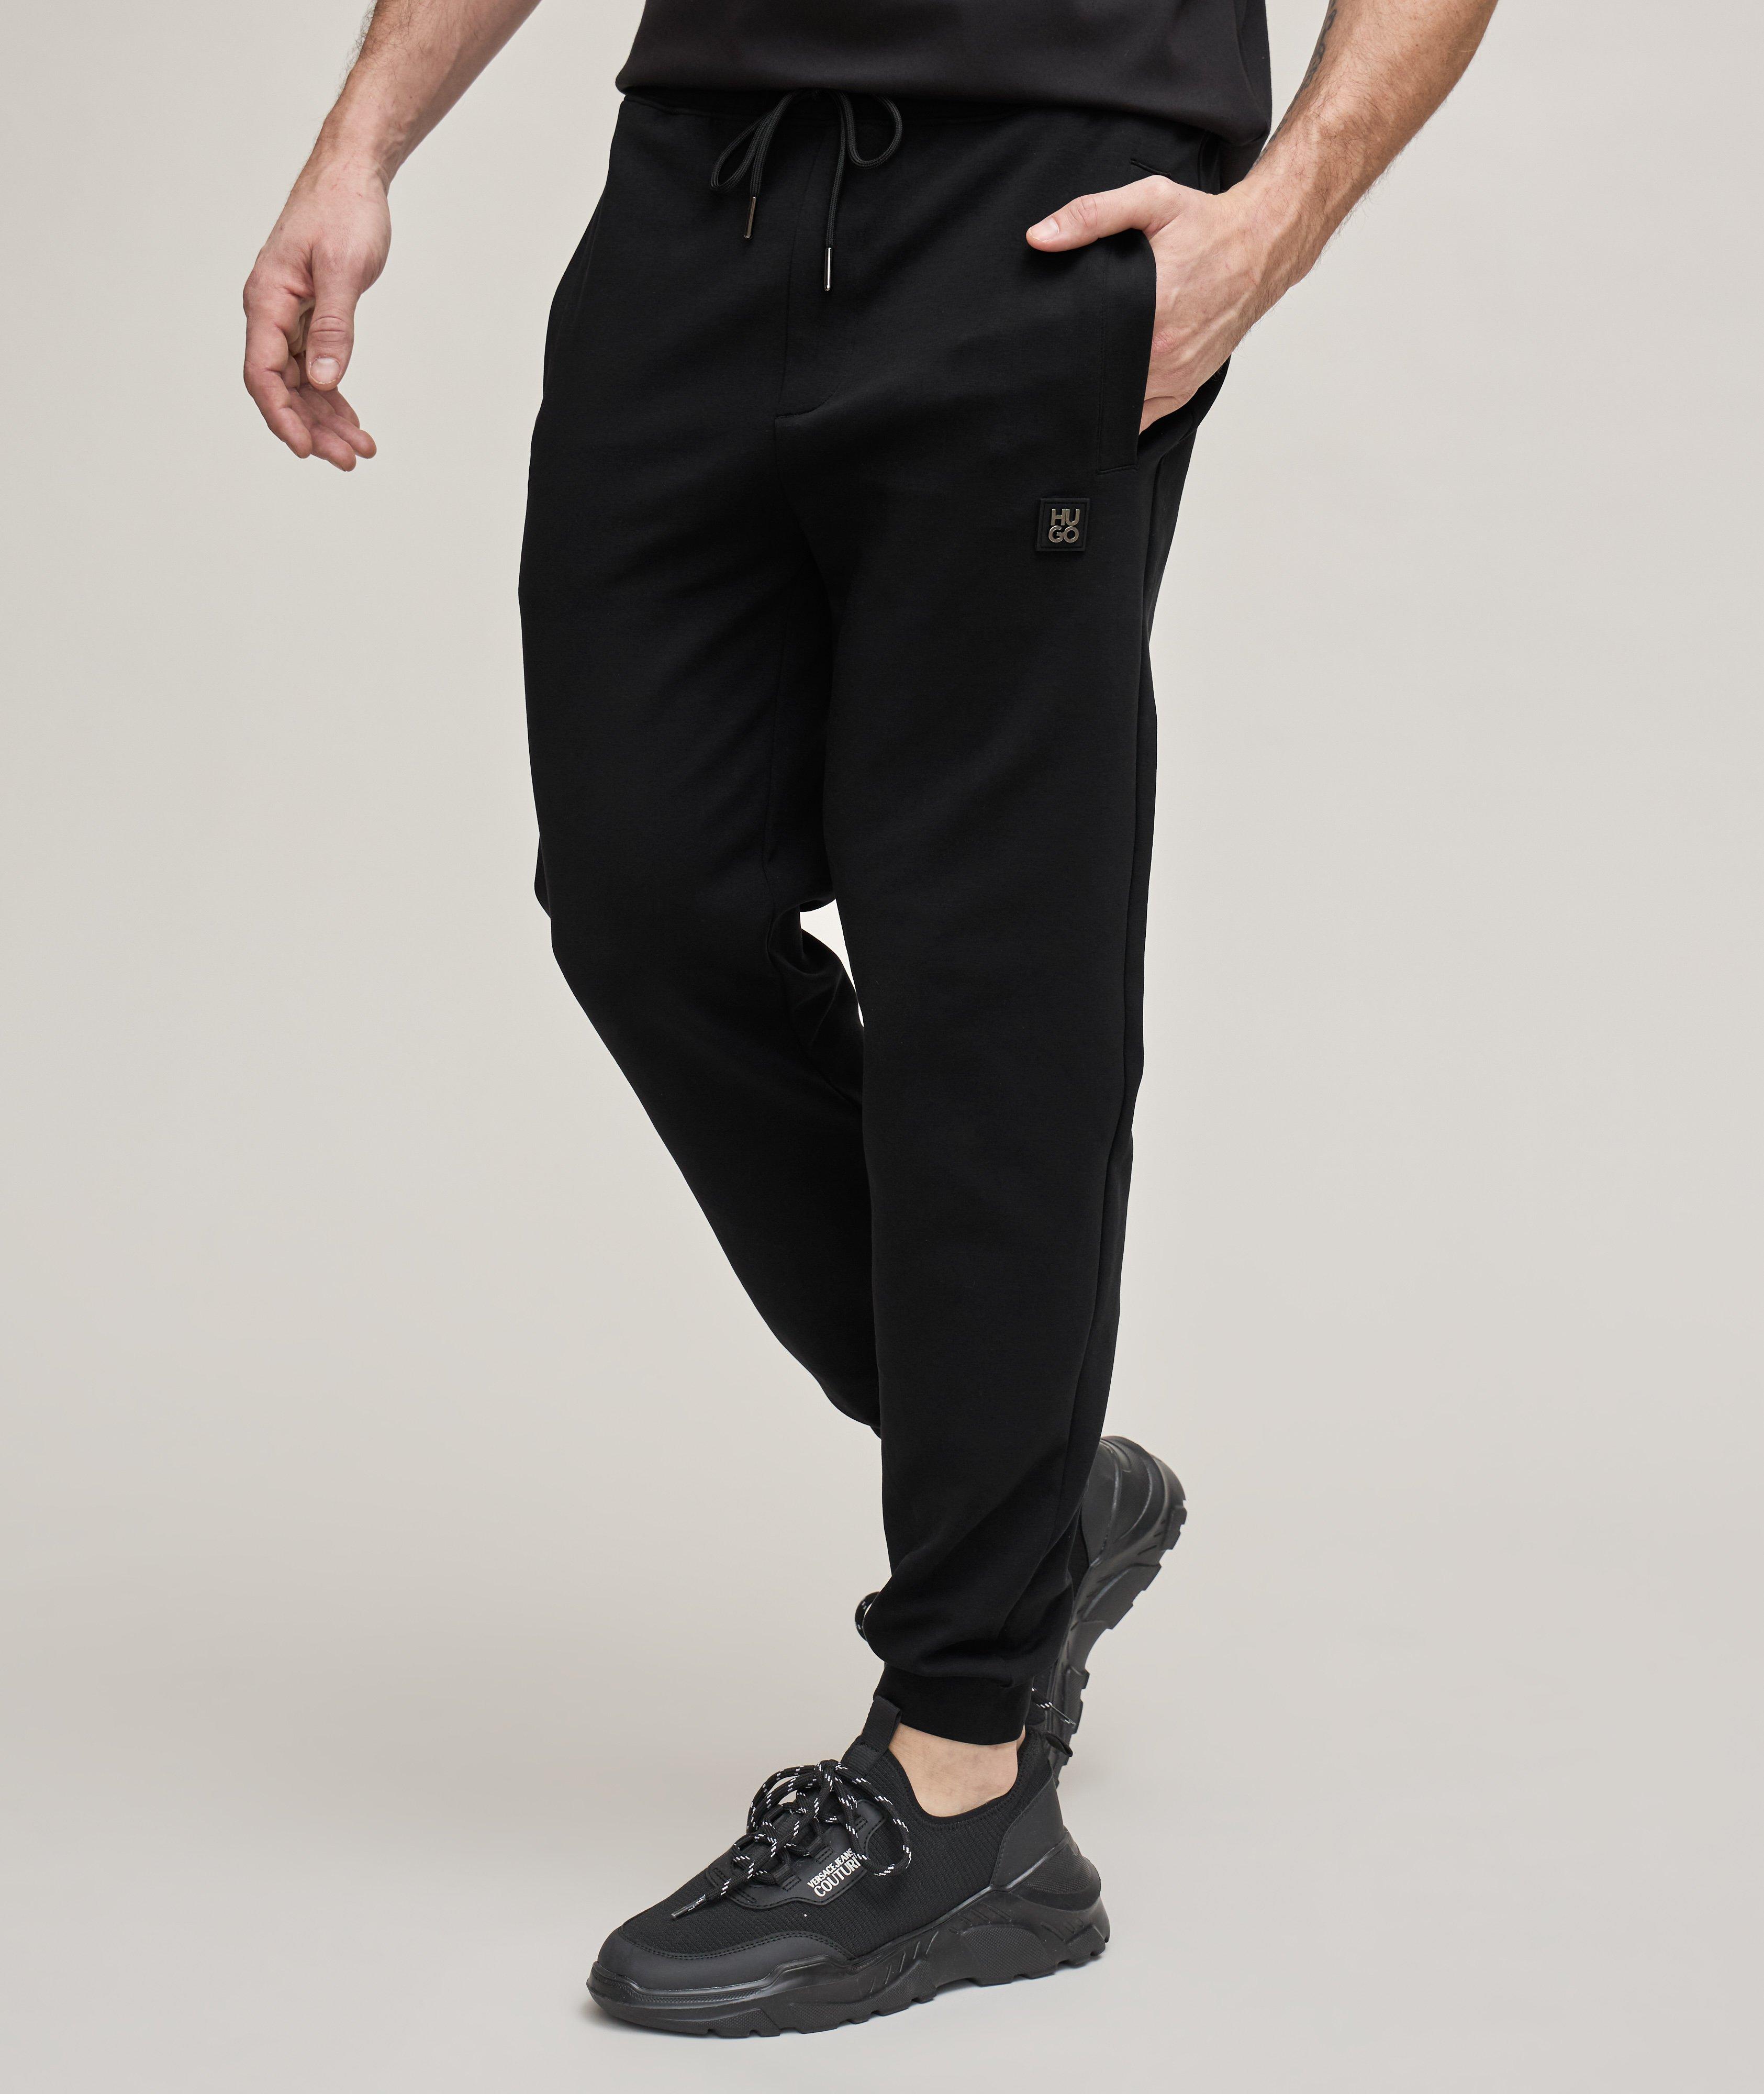 Stacked Logo Stretch-Cotton Sweatpants image 1